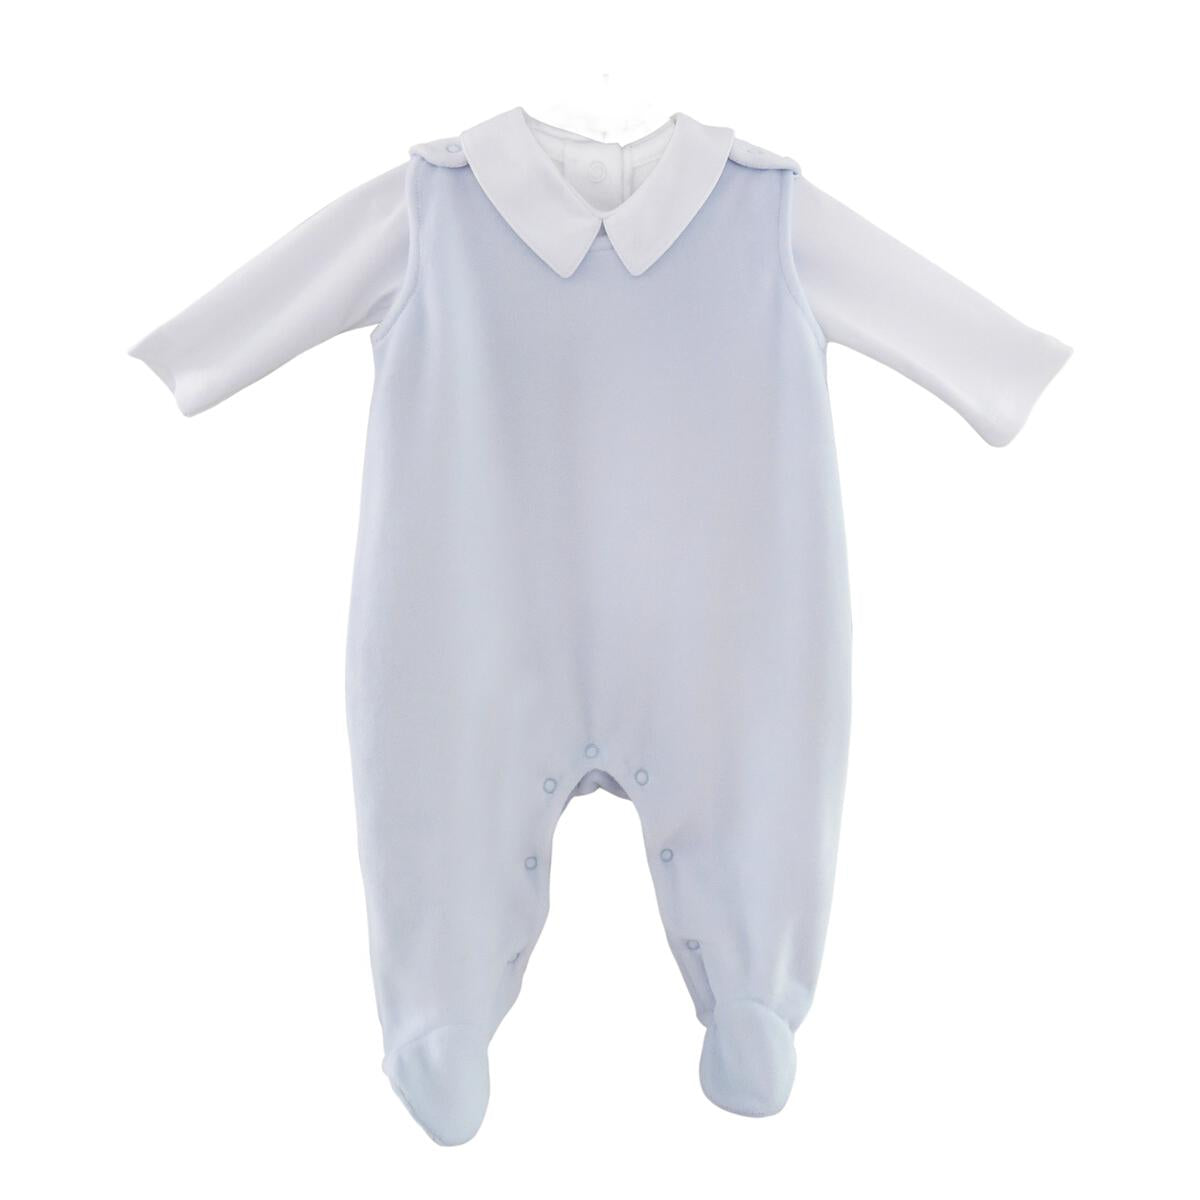 Lyda Baby Velour Collection Footie W/White Knit Shirt (Overalls) PL430V 5007